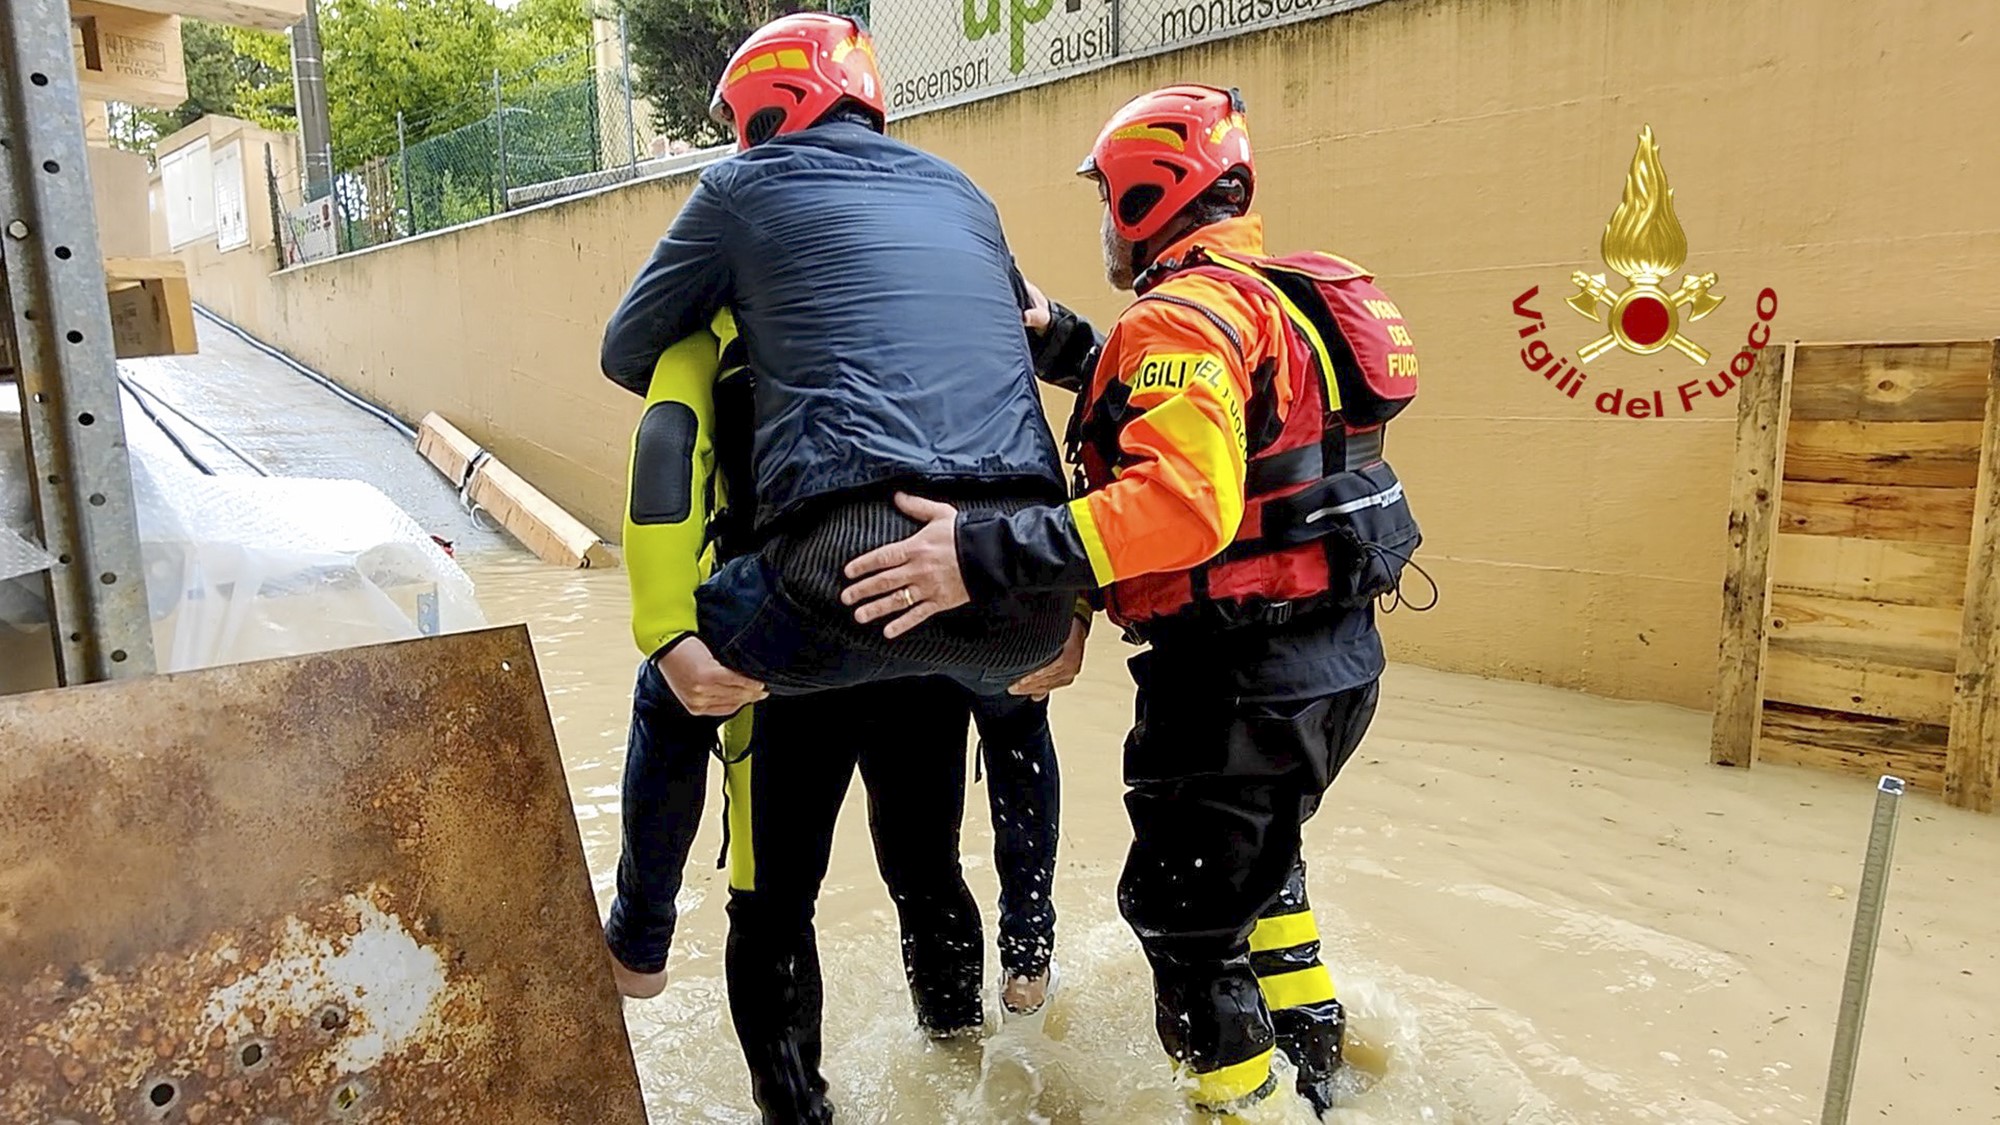 A person carrying another on their back through flood waters, wearing helmets. Another man stands nearby helping.